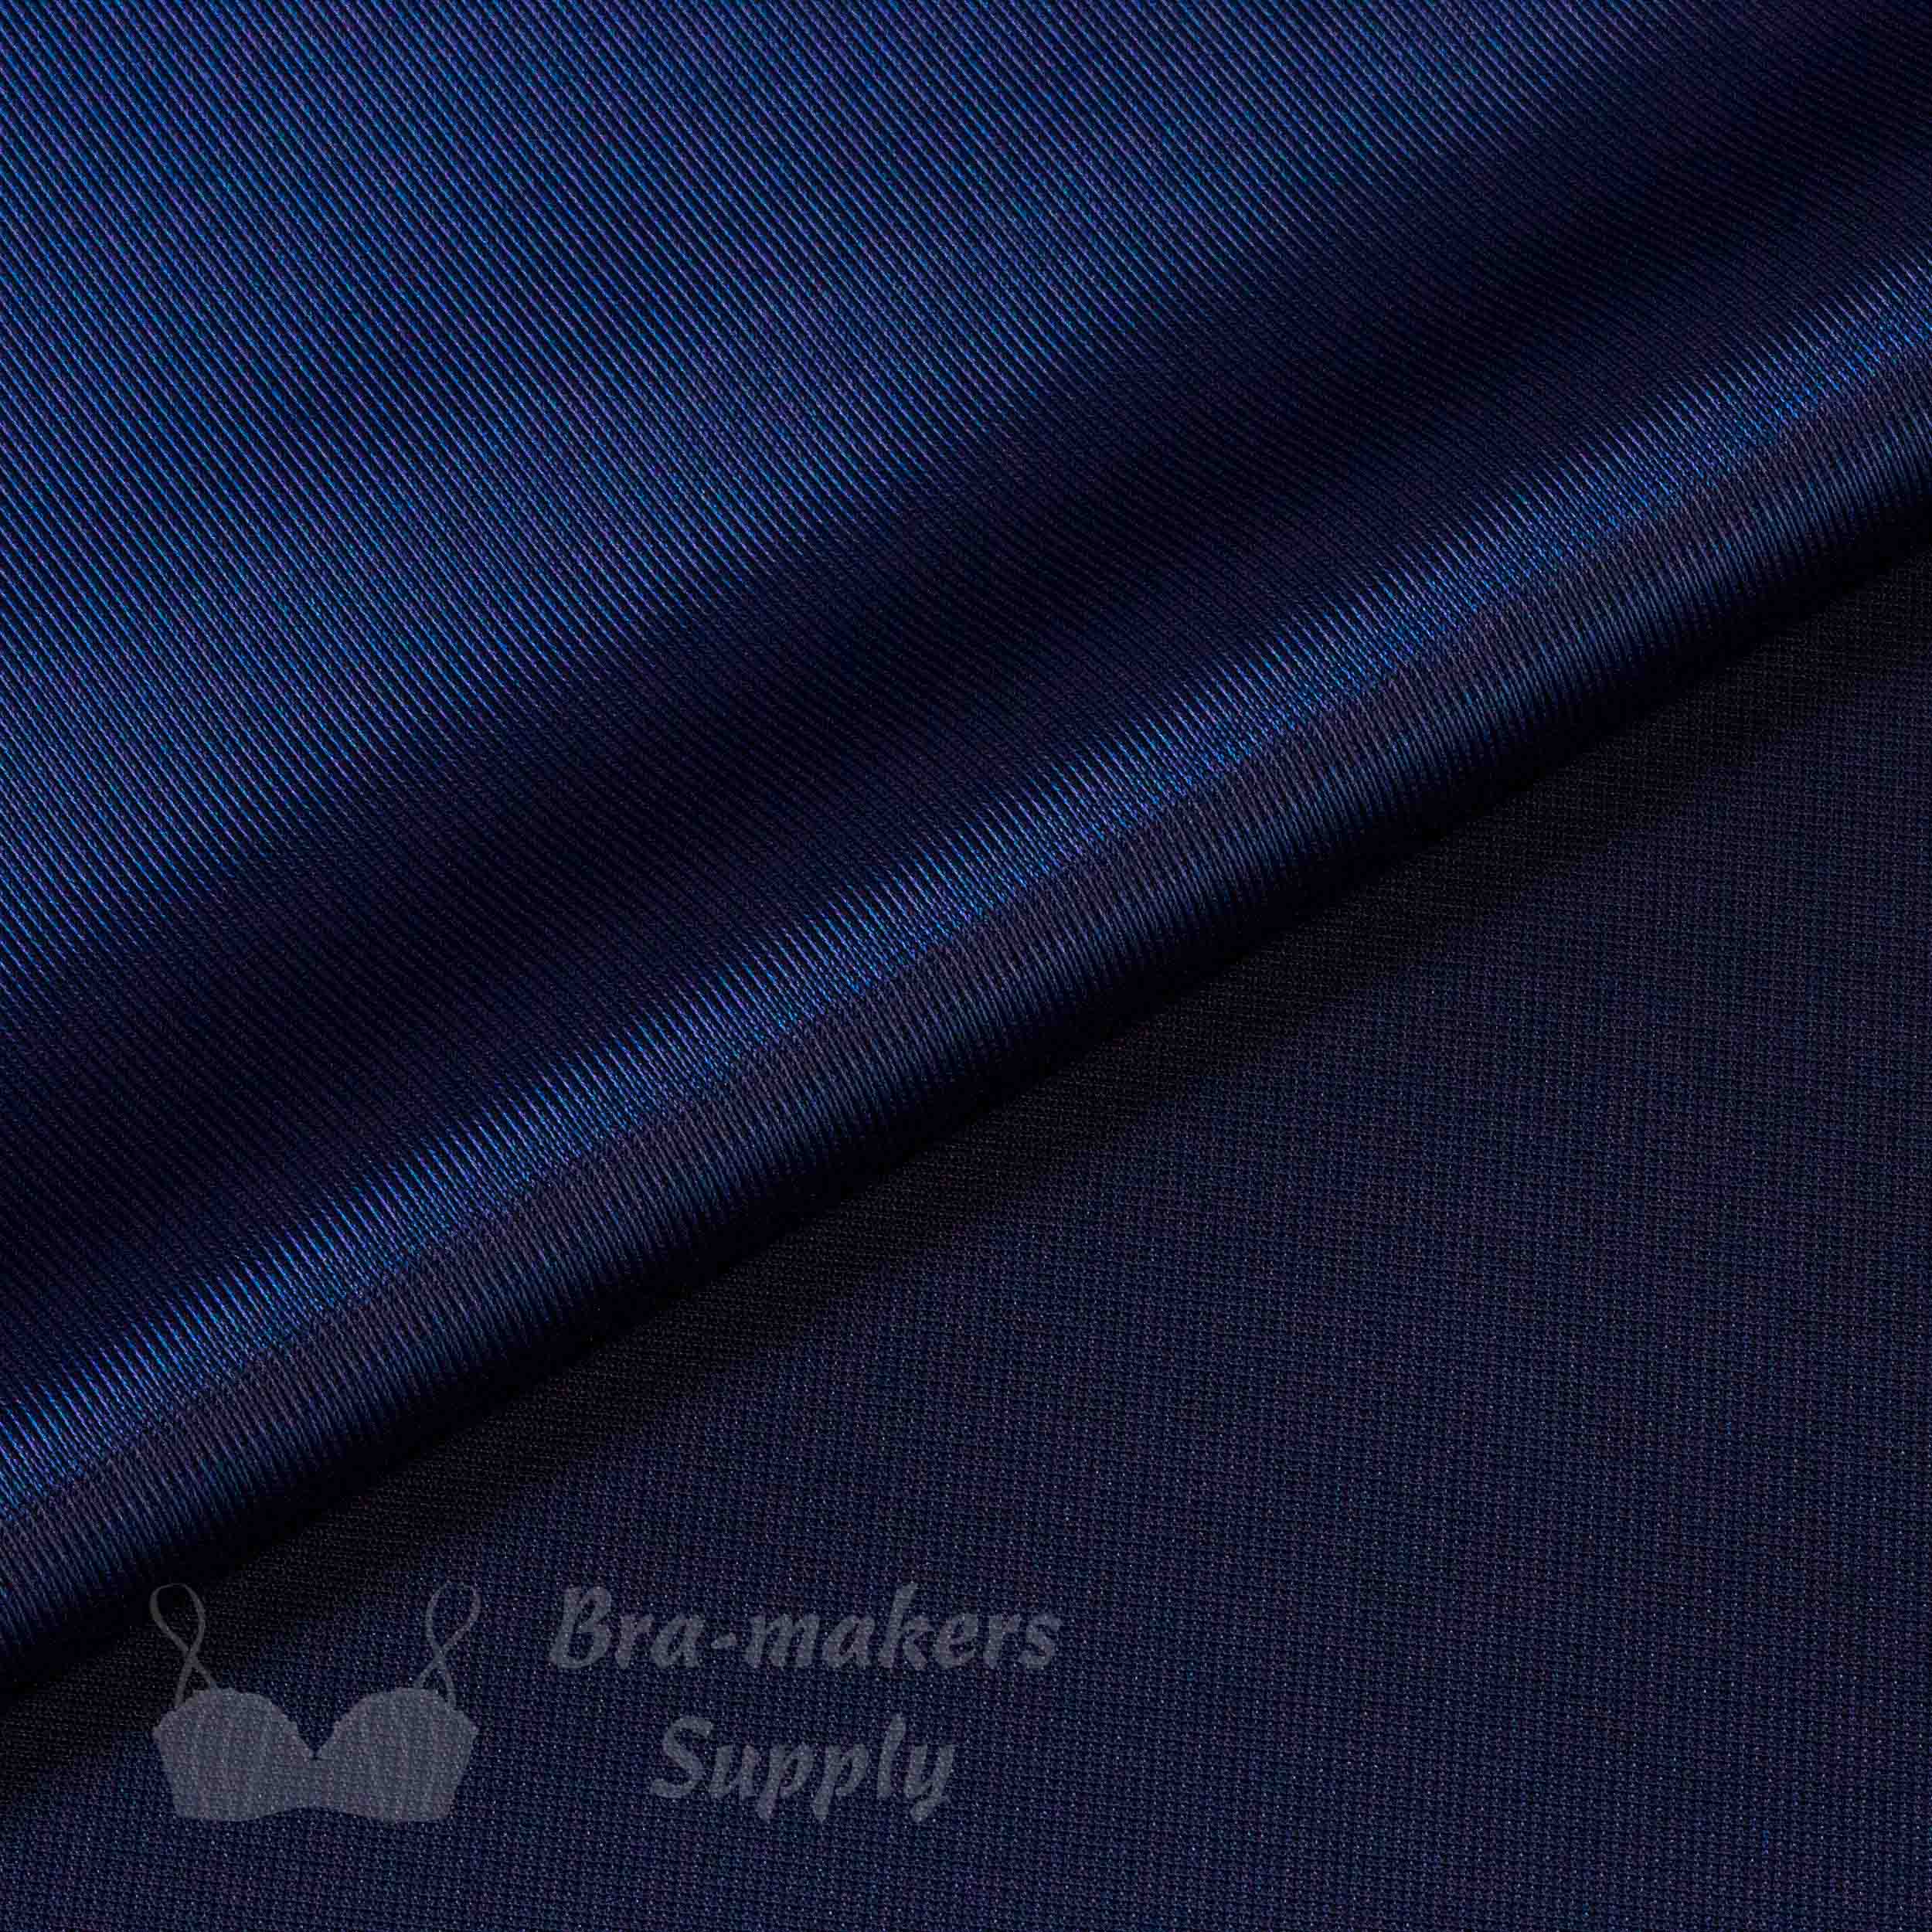 Bra/Lingerie Making - Cup Fabric - Tricot - Duoplex 165gsm